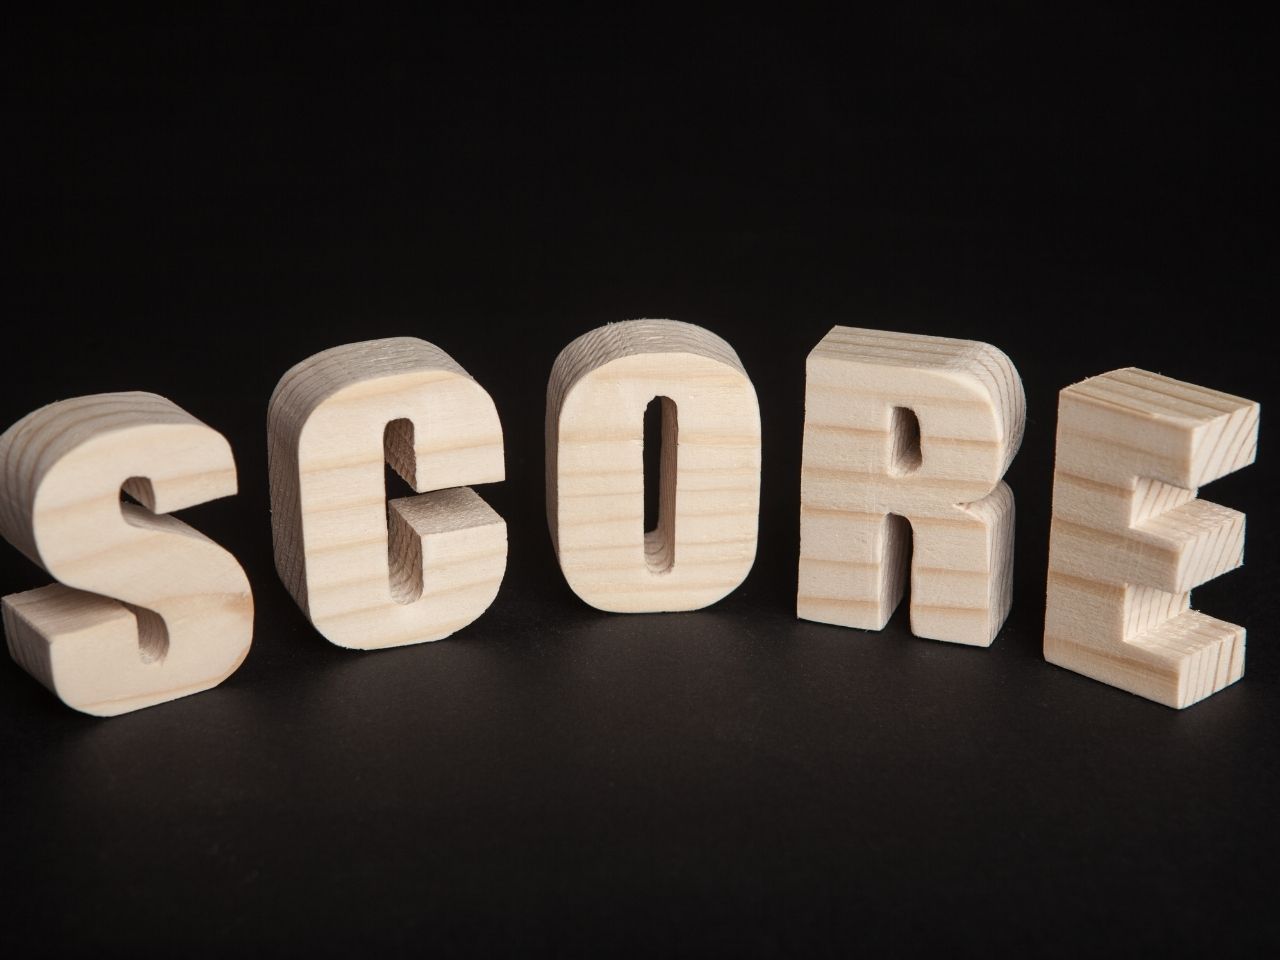 Word score from wood